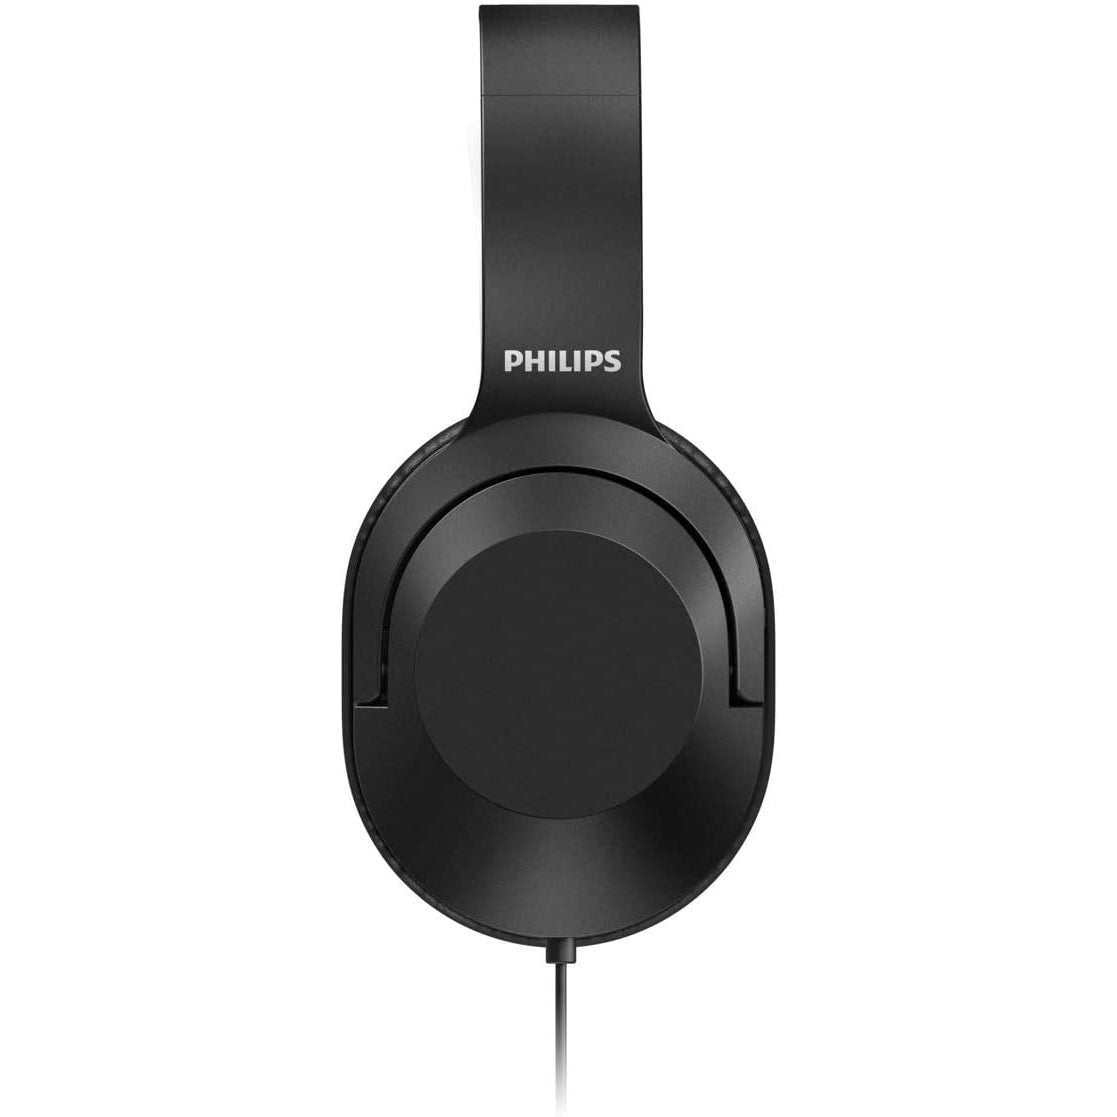 PHILIPS Audio H2005BK/00 Over-Ear Stereo Headphones Wired - Black - Healthxpress.ie